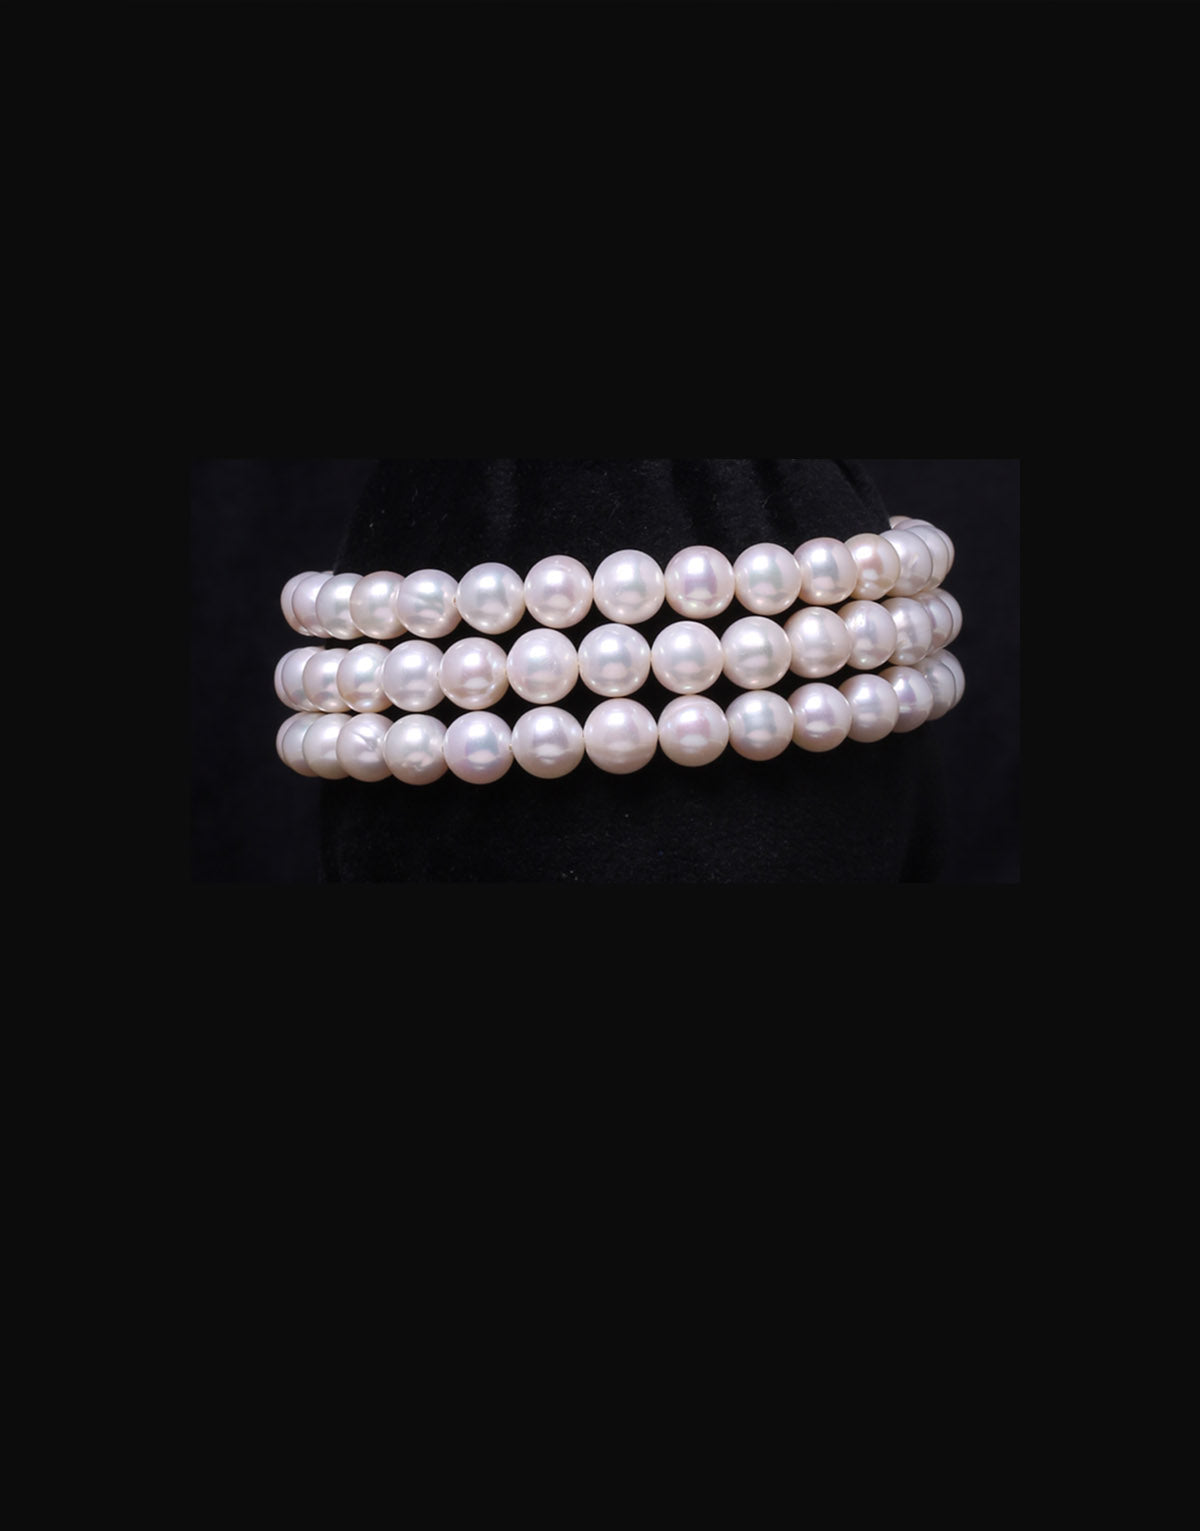 3mm Small Tiny High Luster AAA+ White Round Minimalist Pearl Bracelet | eBay